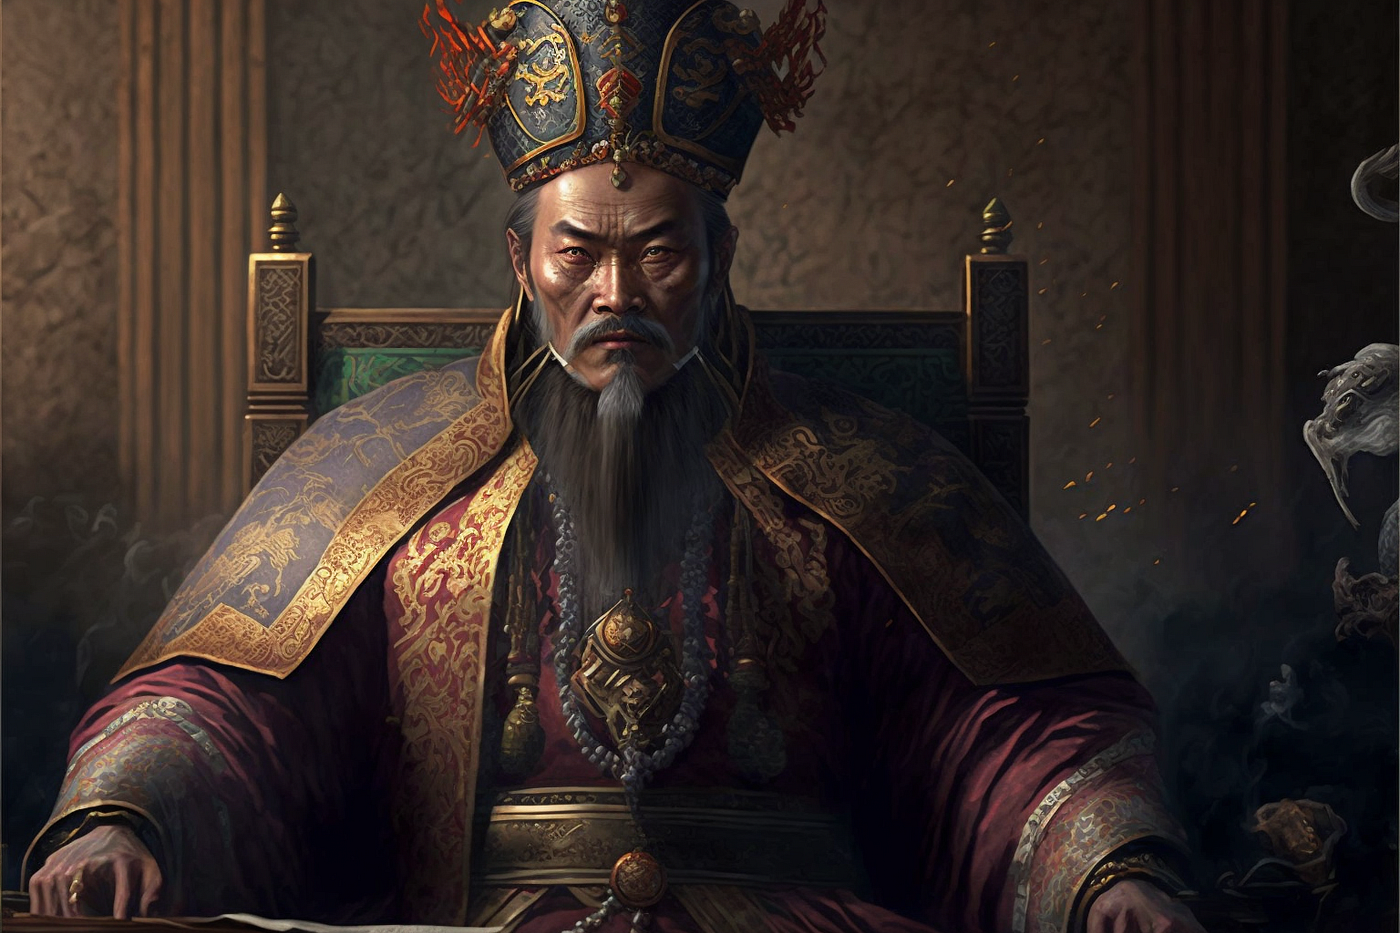 Chinese Mythology Porn - A Look at Chinese Mythology: The Yellow Emperor, The Flame Emperor, and the  Warlord | by Sevin | Medium